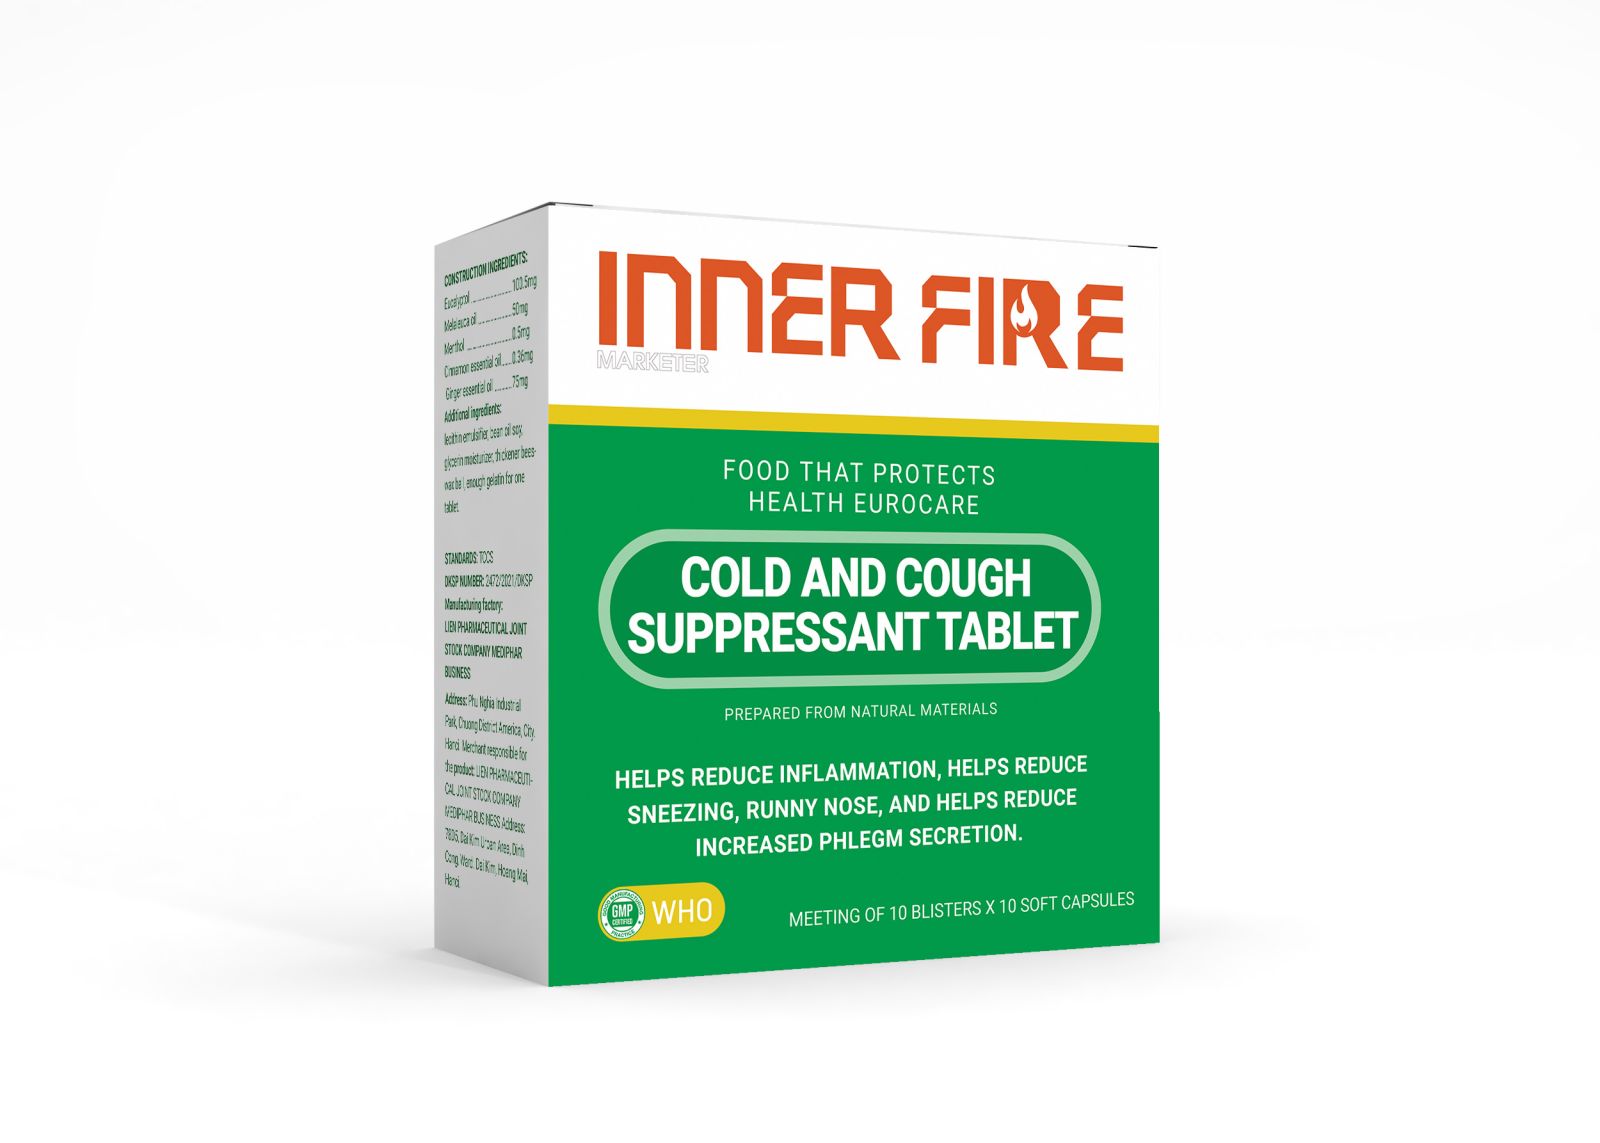 Cold and Cough Suppressant Tablet